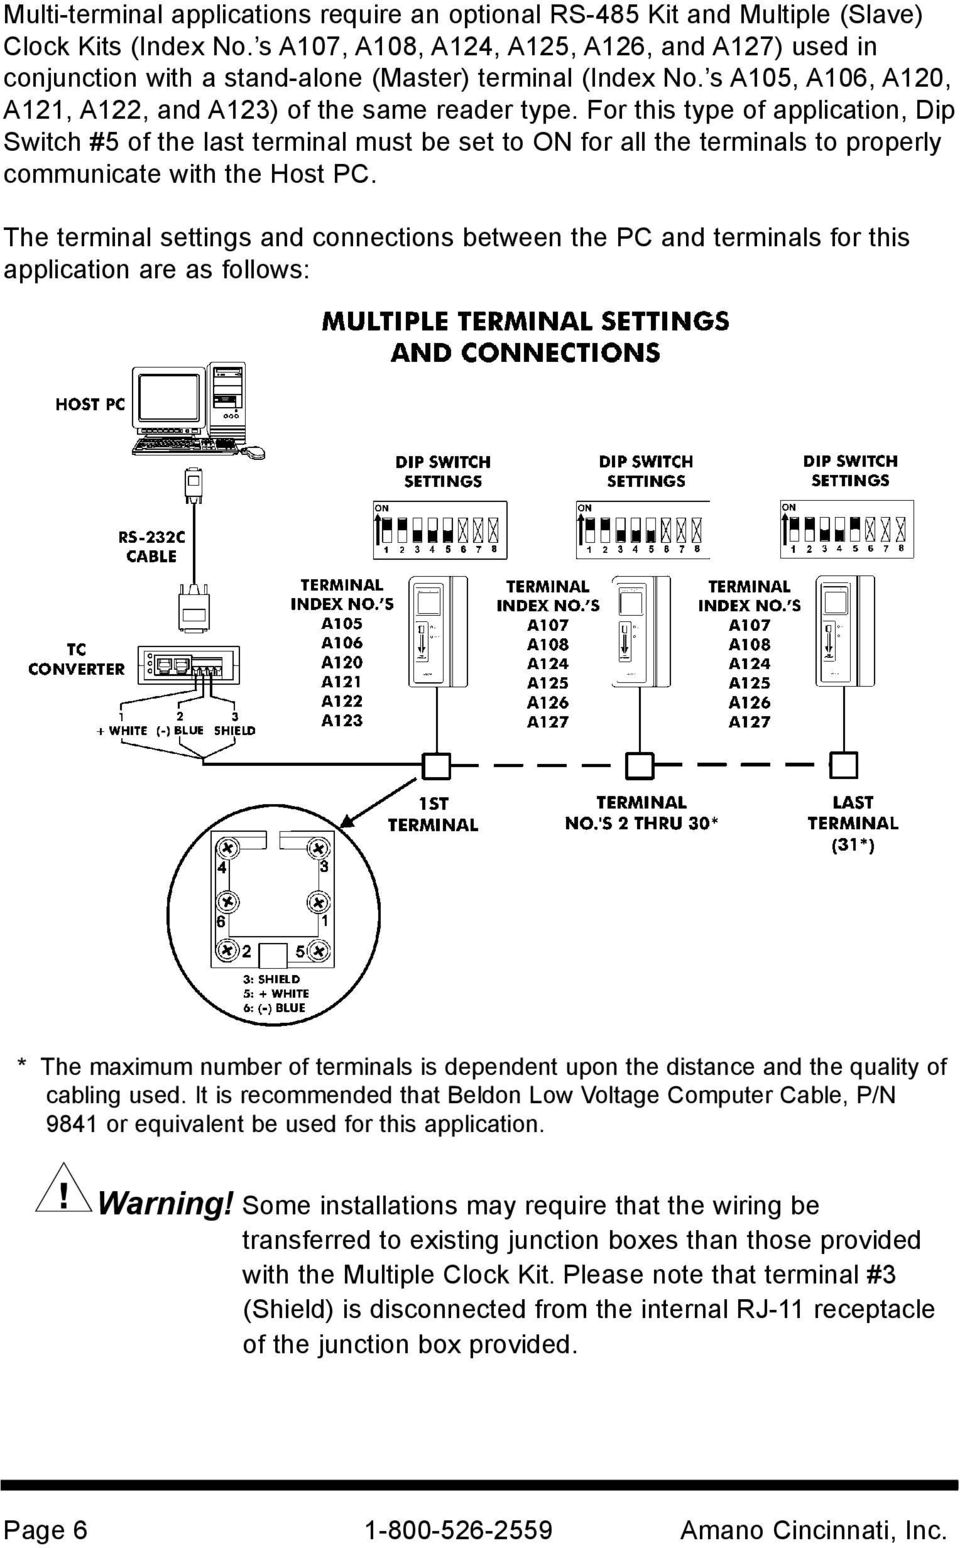 For this type of application, Dip Switch #5 of the last terminal must be set to ON for all the terminals to properly communicate with the Host PC.